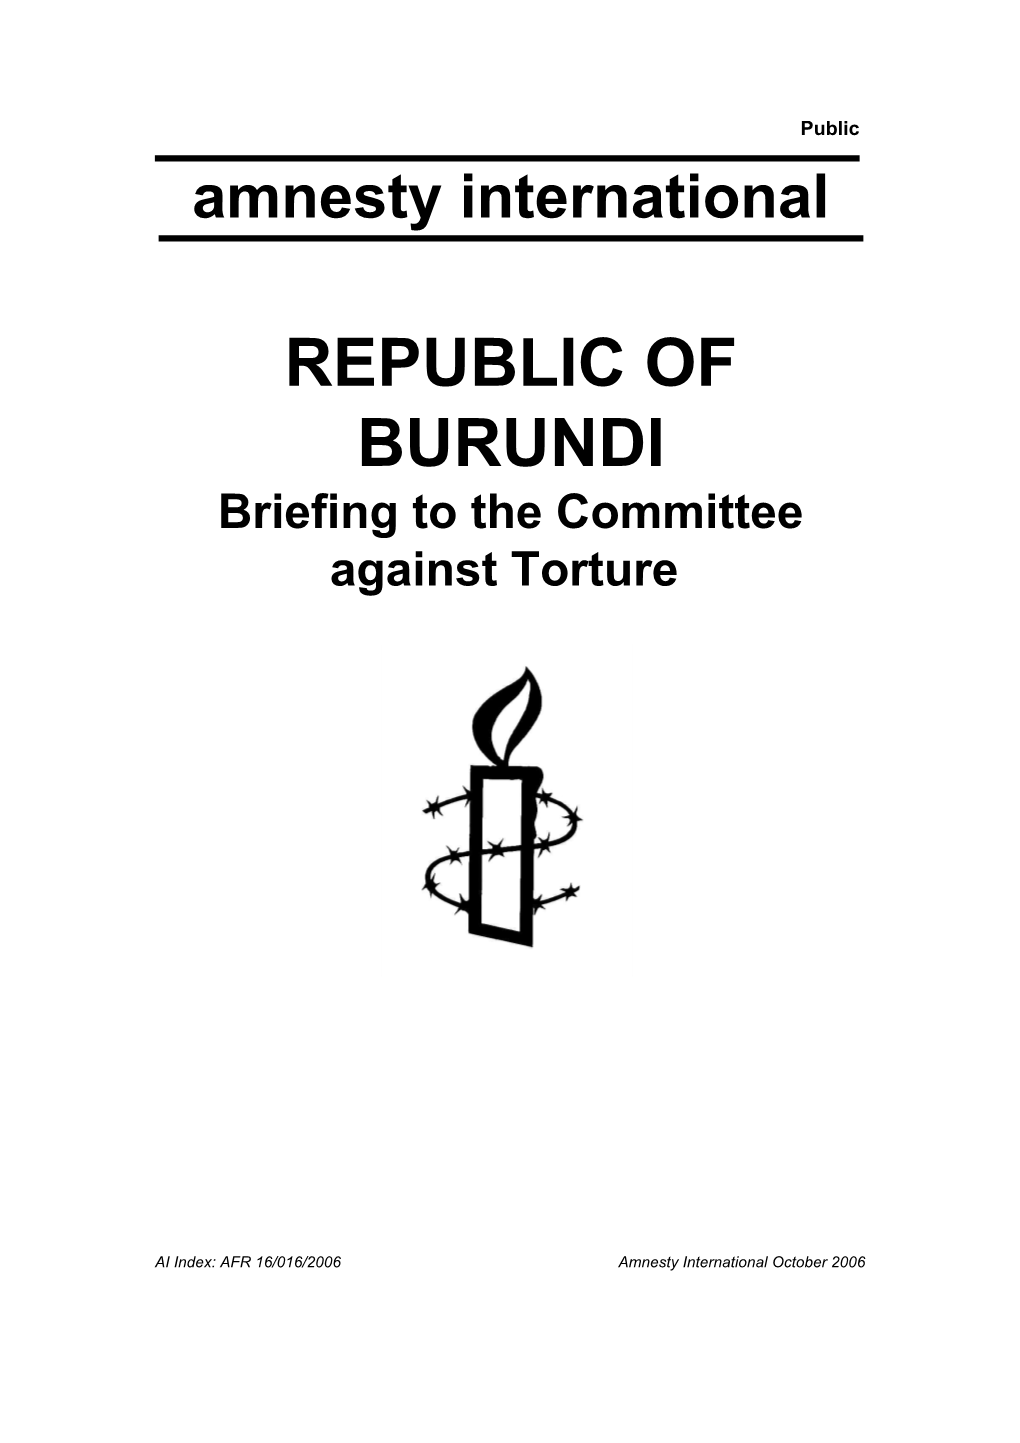 Briefing to the Committee Against Torture